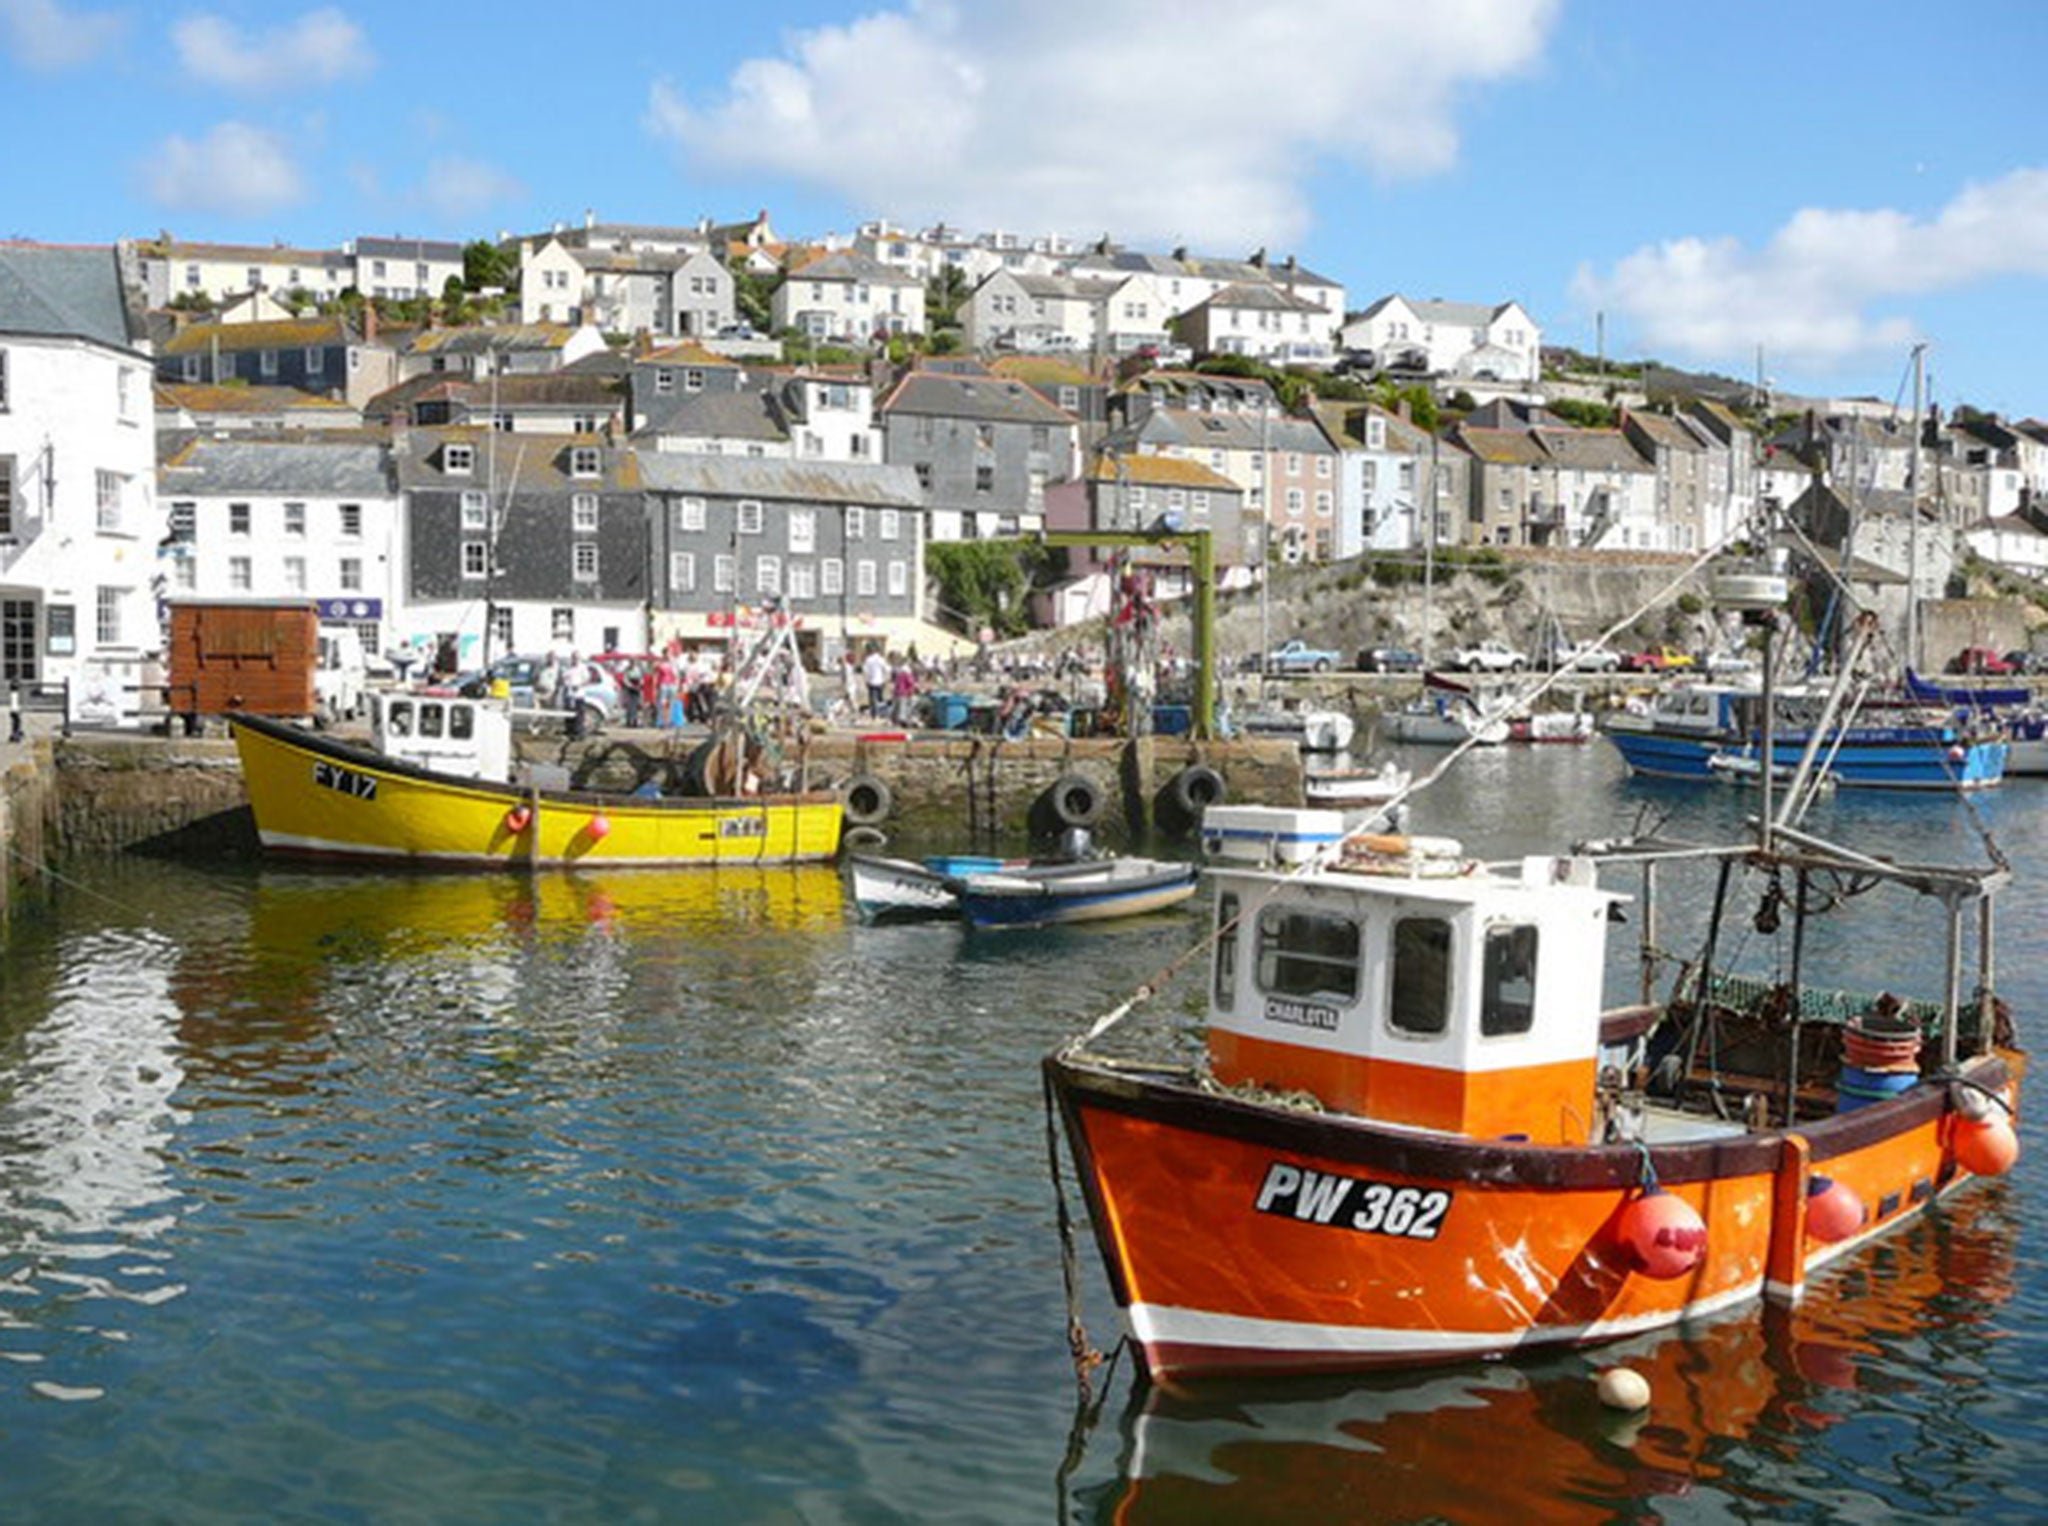 The Mevagissey Harbour